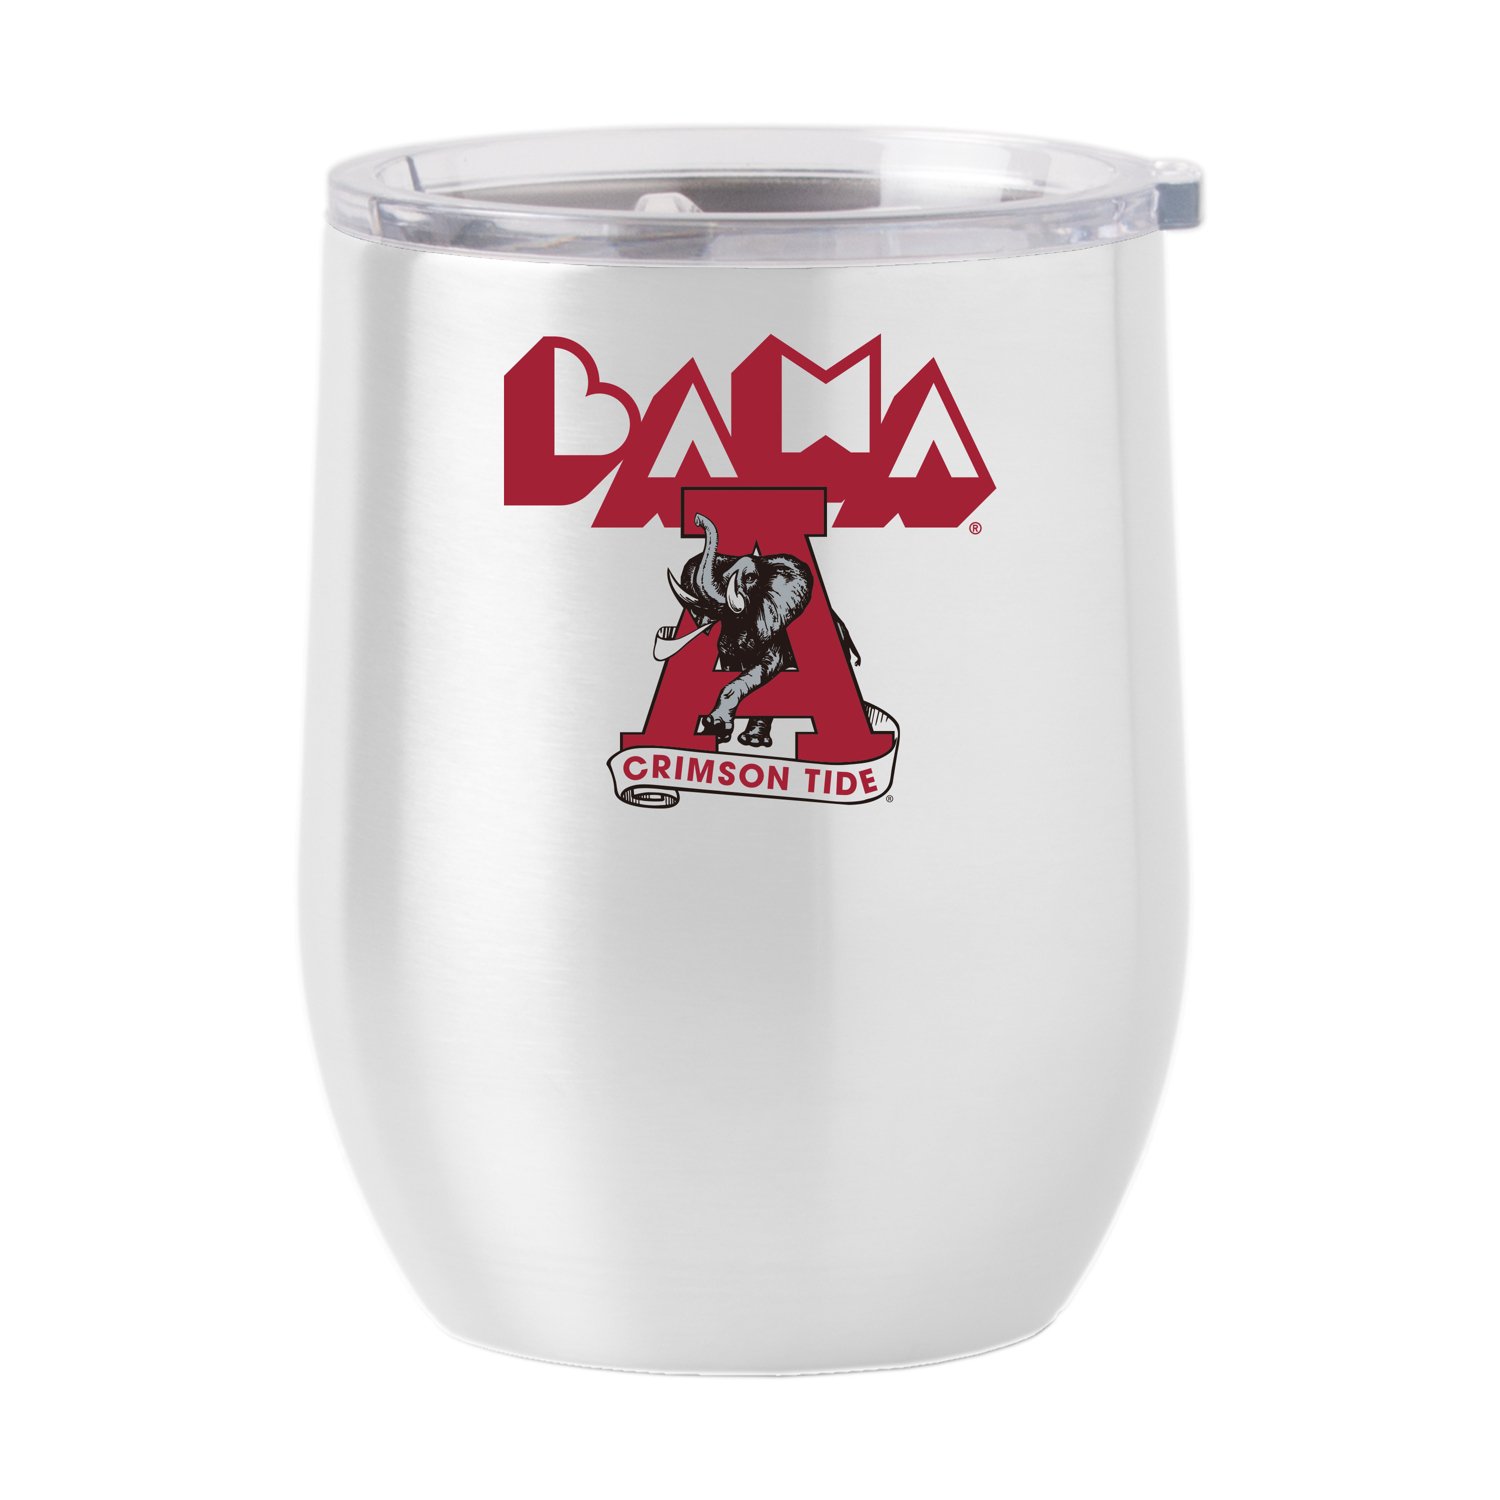 https://academy.scene7.com/is/image/academy//drinkware/logo-brands-university-of-alabama-16-oz-arcade-stainless-curved-beverage-tumbler-102v-s16cb-59-white/05897b59d90646a8965a6eabaad2d9d7?$pdp-gallery-ng$